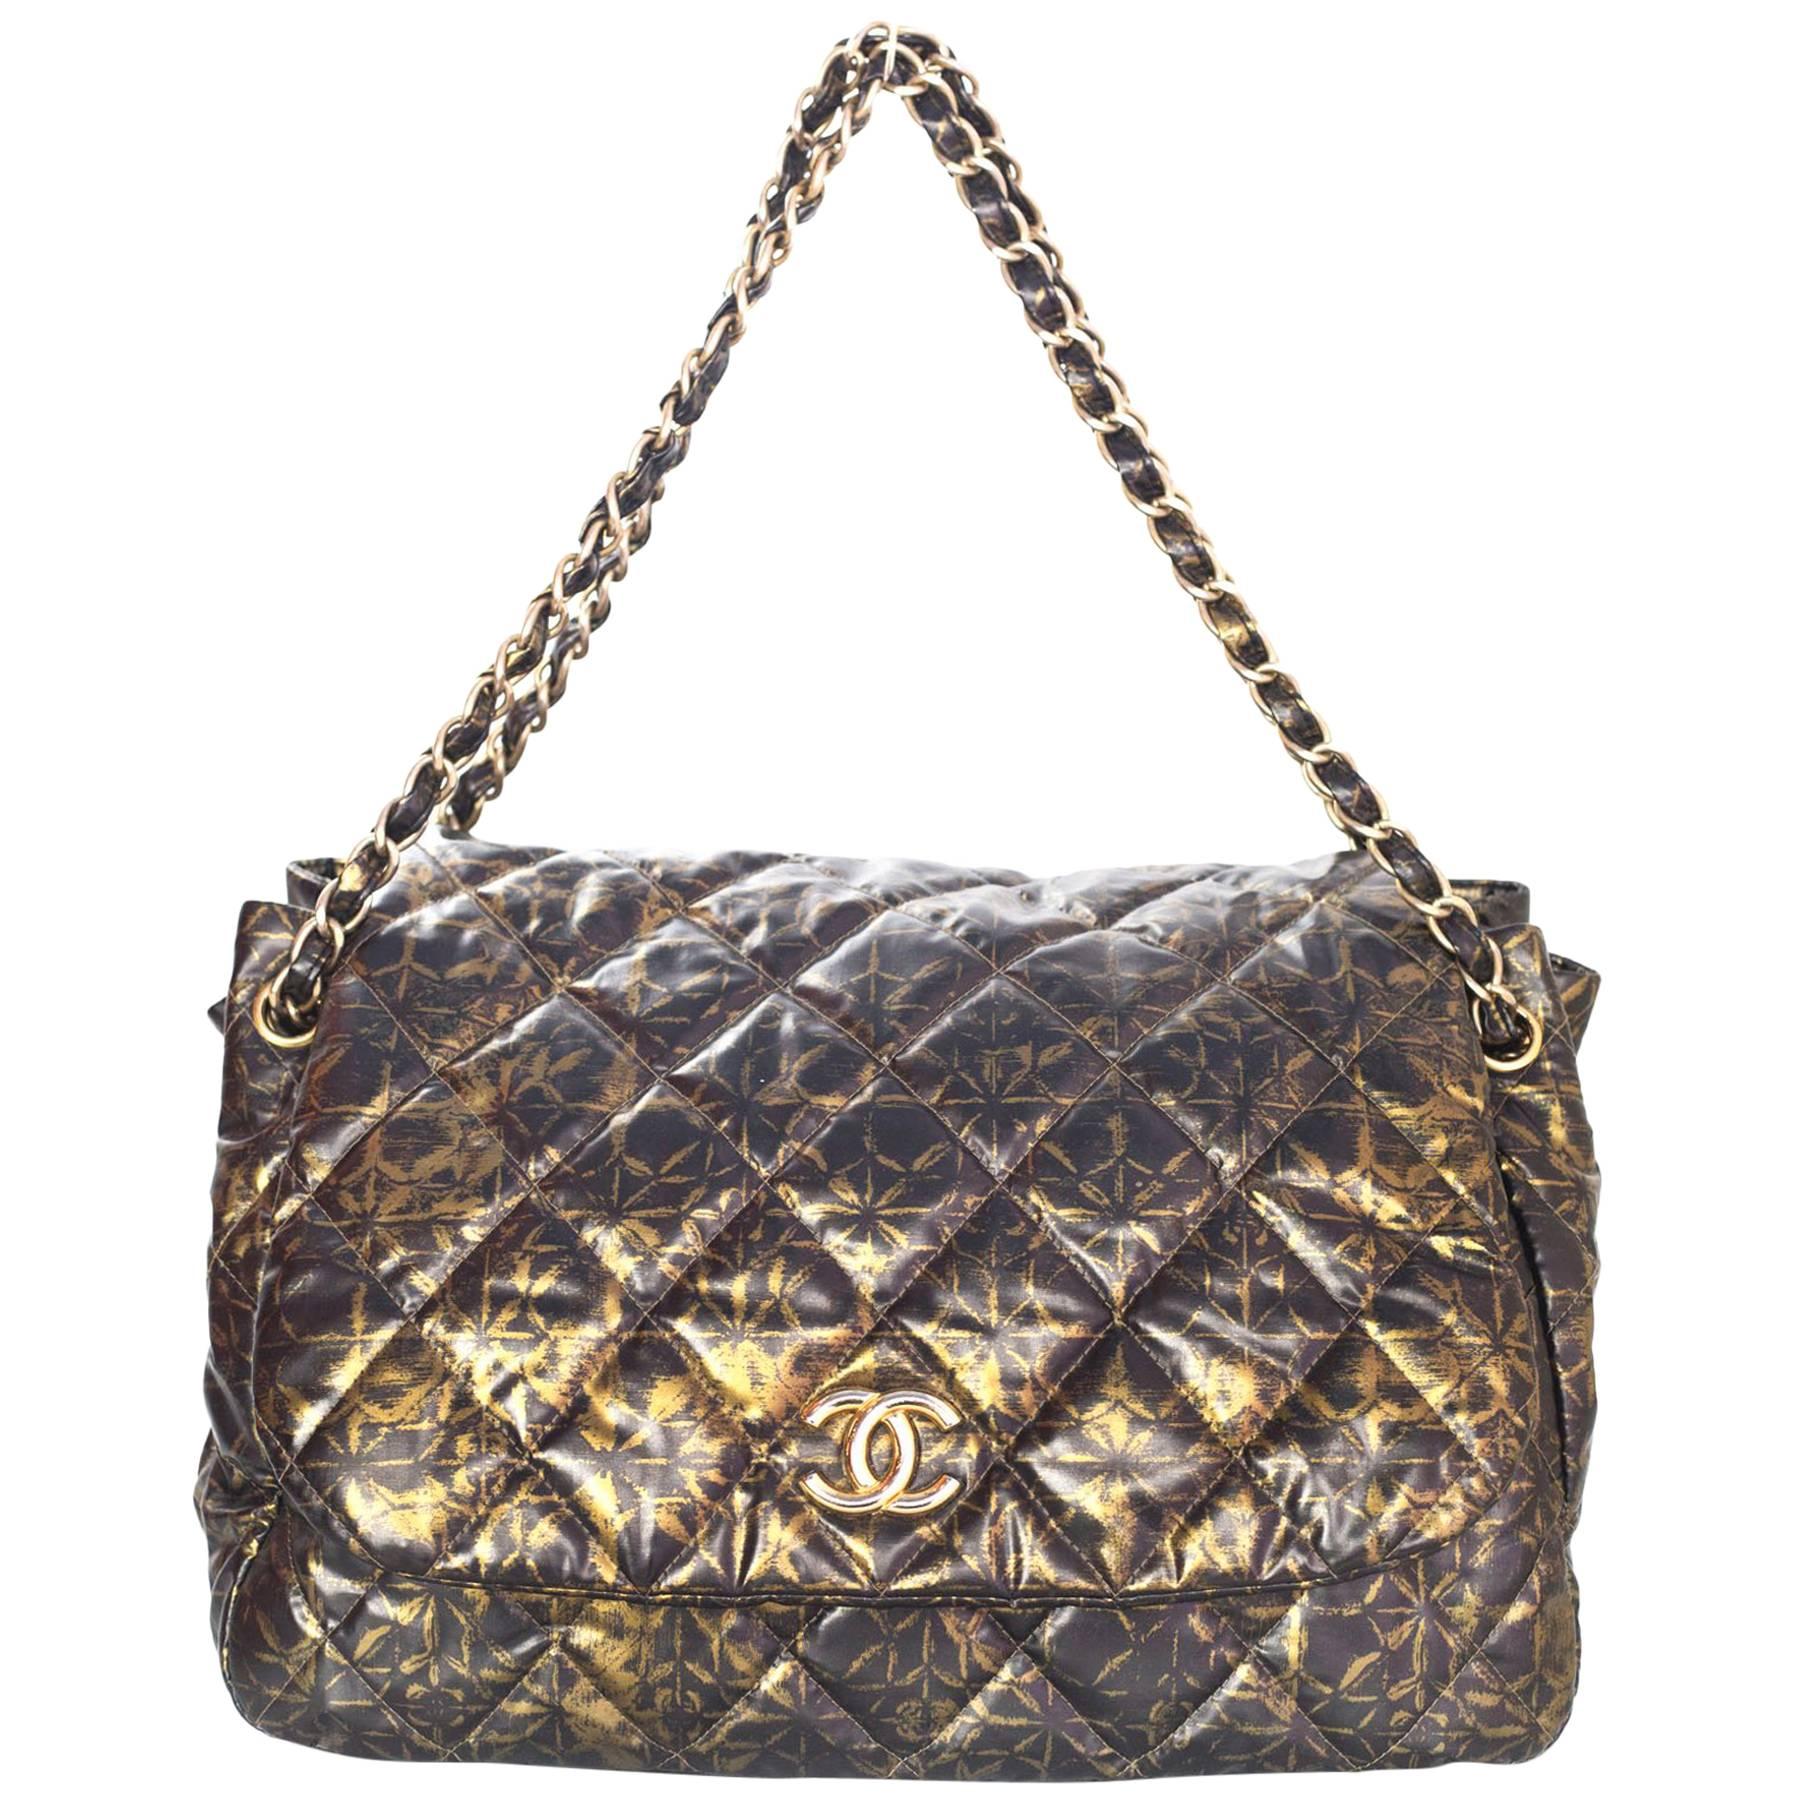 Chanel Black and Gold Quilted Print Accordion Flap Bag